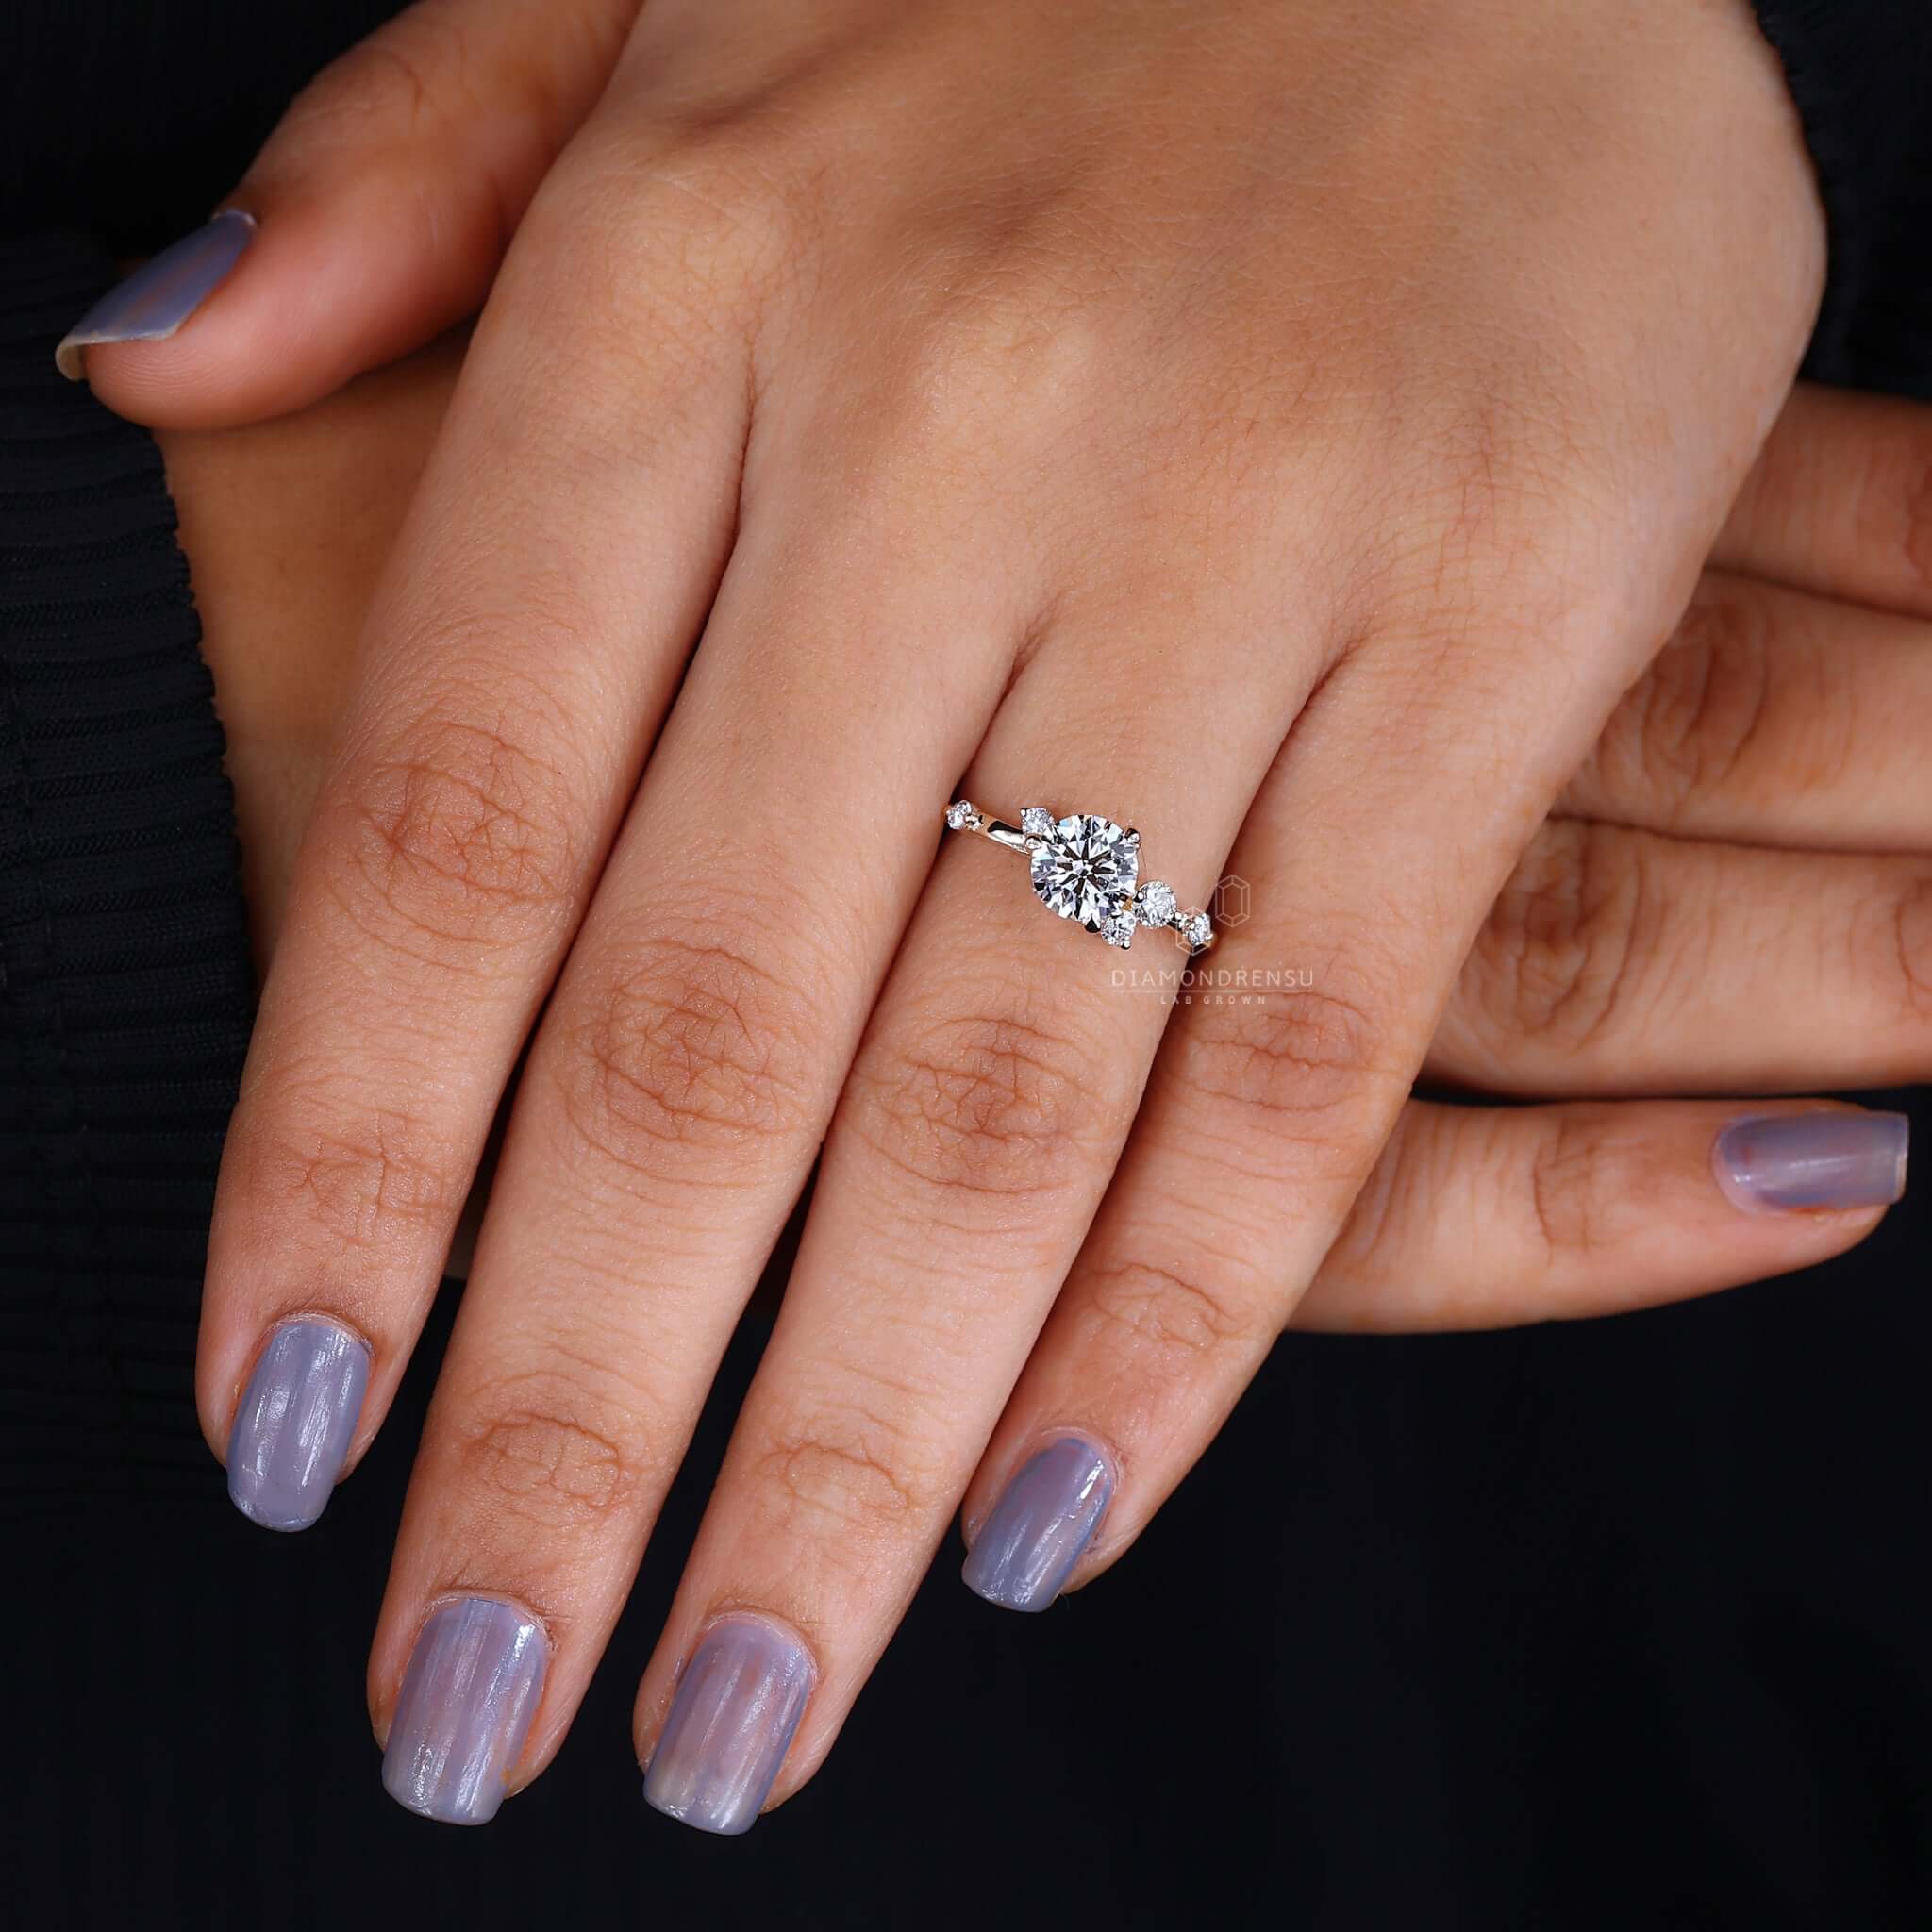 Hand model presenting a diamond cluster engagement ring, emphasizing its enchanting sparkle and love symbol